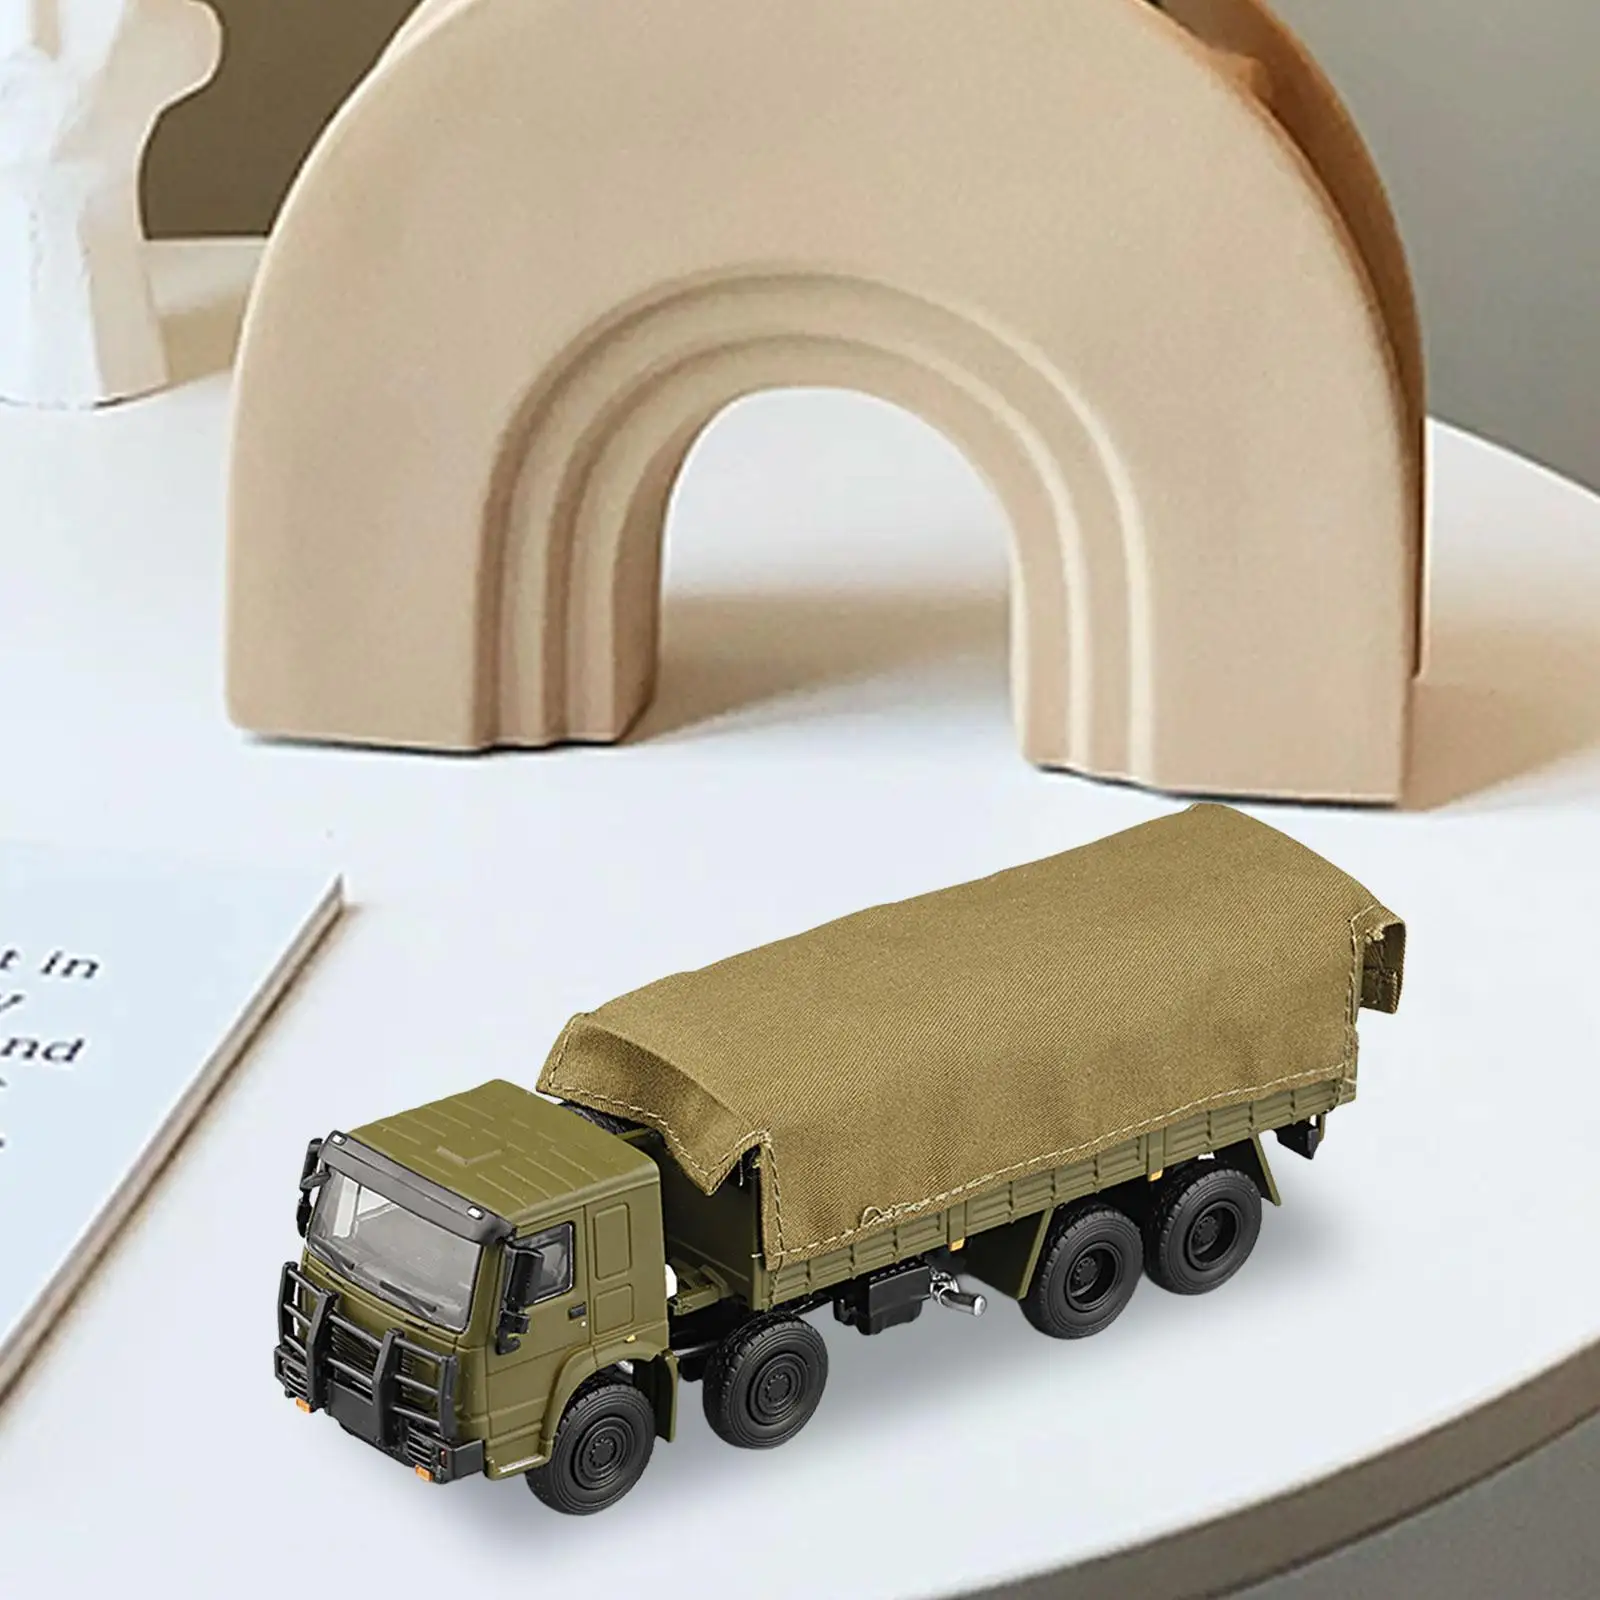 1/64 Car Model Desk Decoration Collectible Vehicles Alloy Car Model for Diorama Photography Props Micro Landscapes Accessories